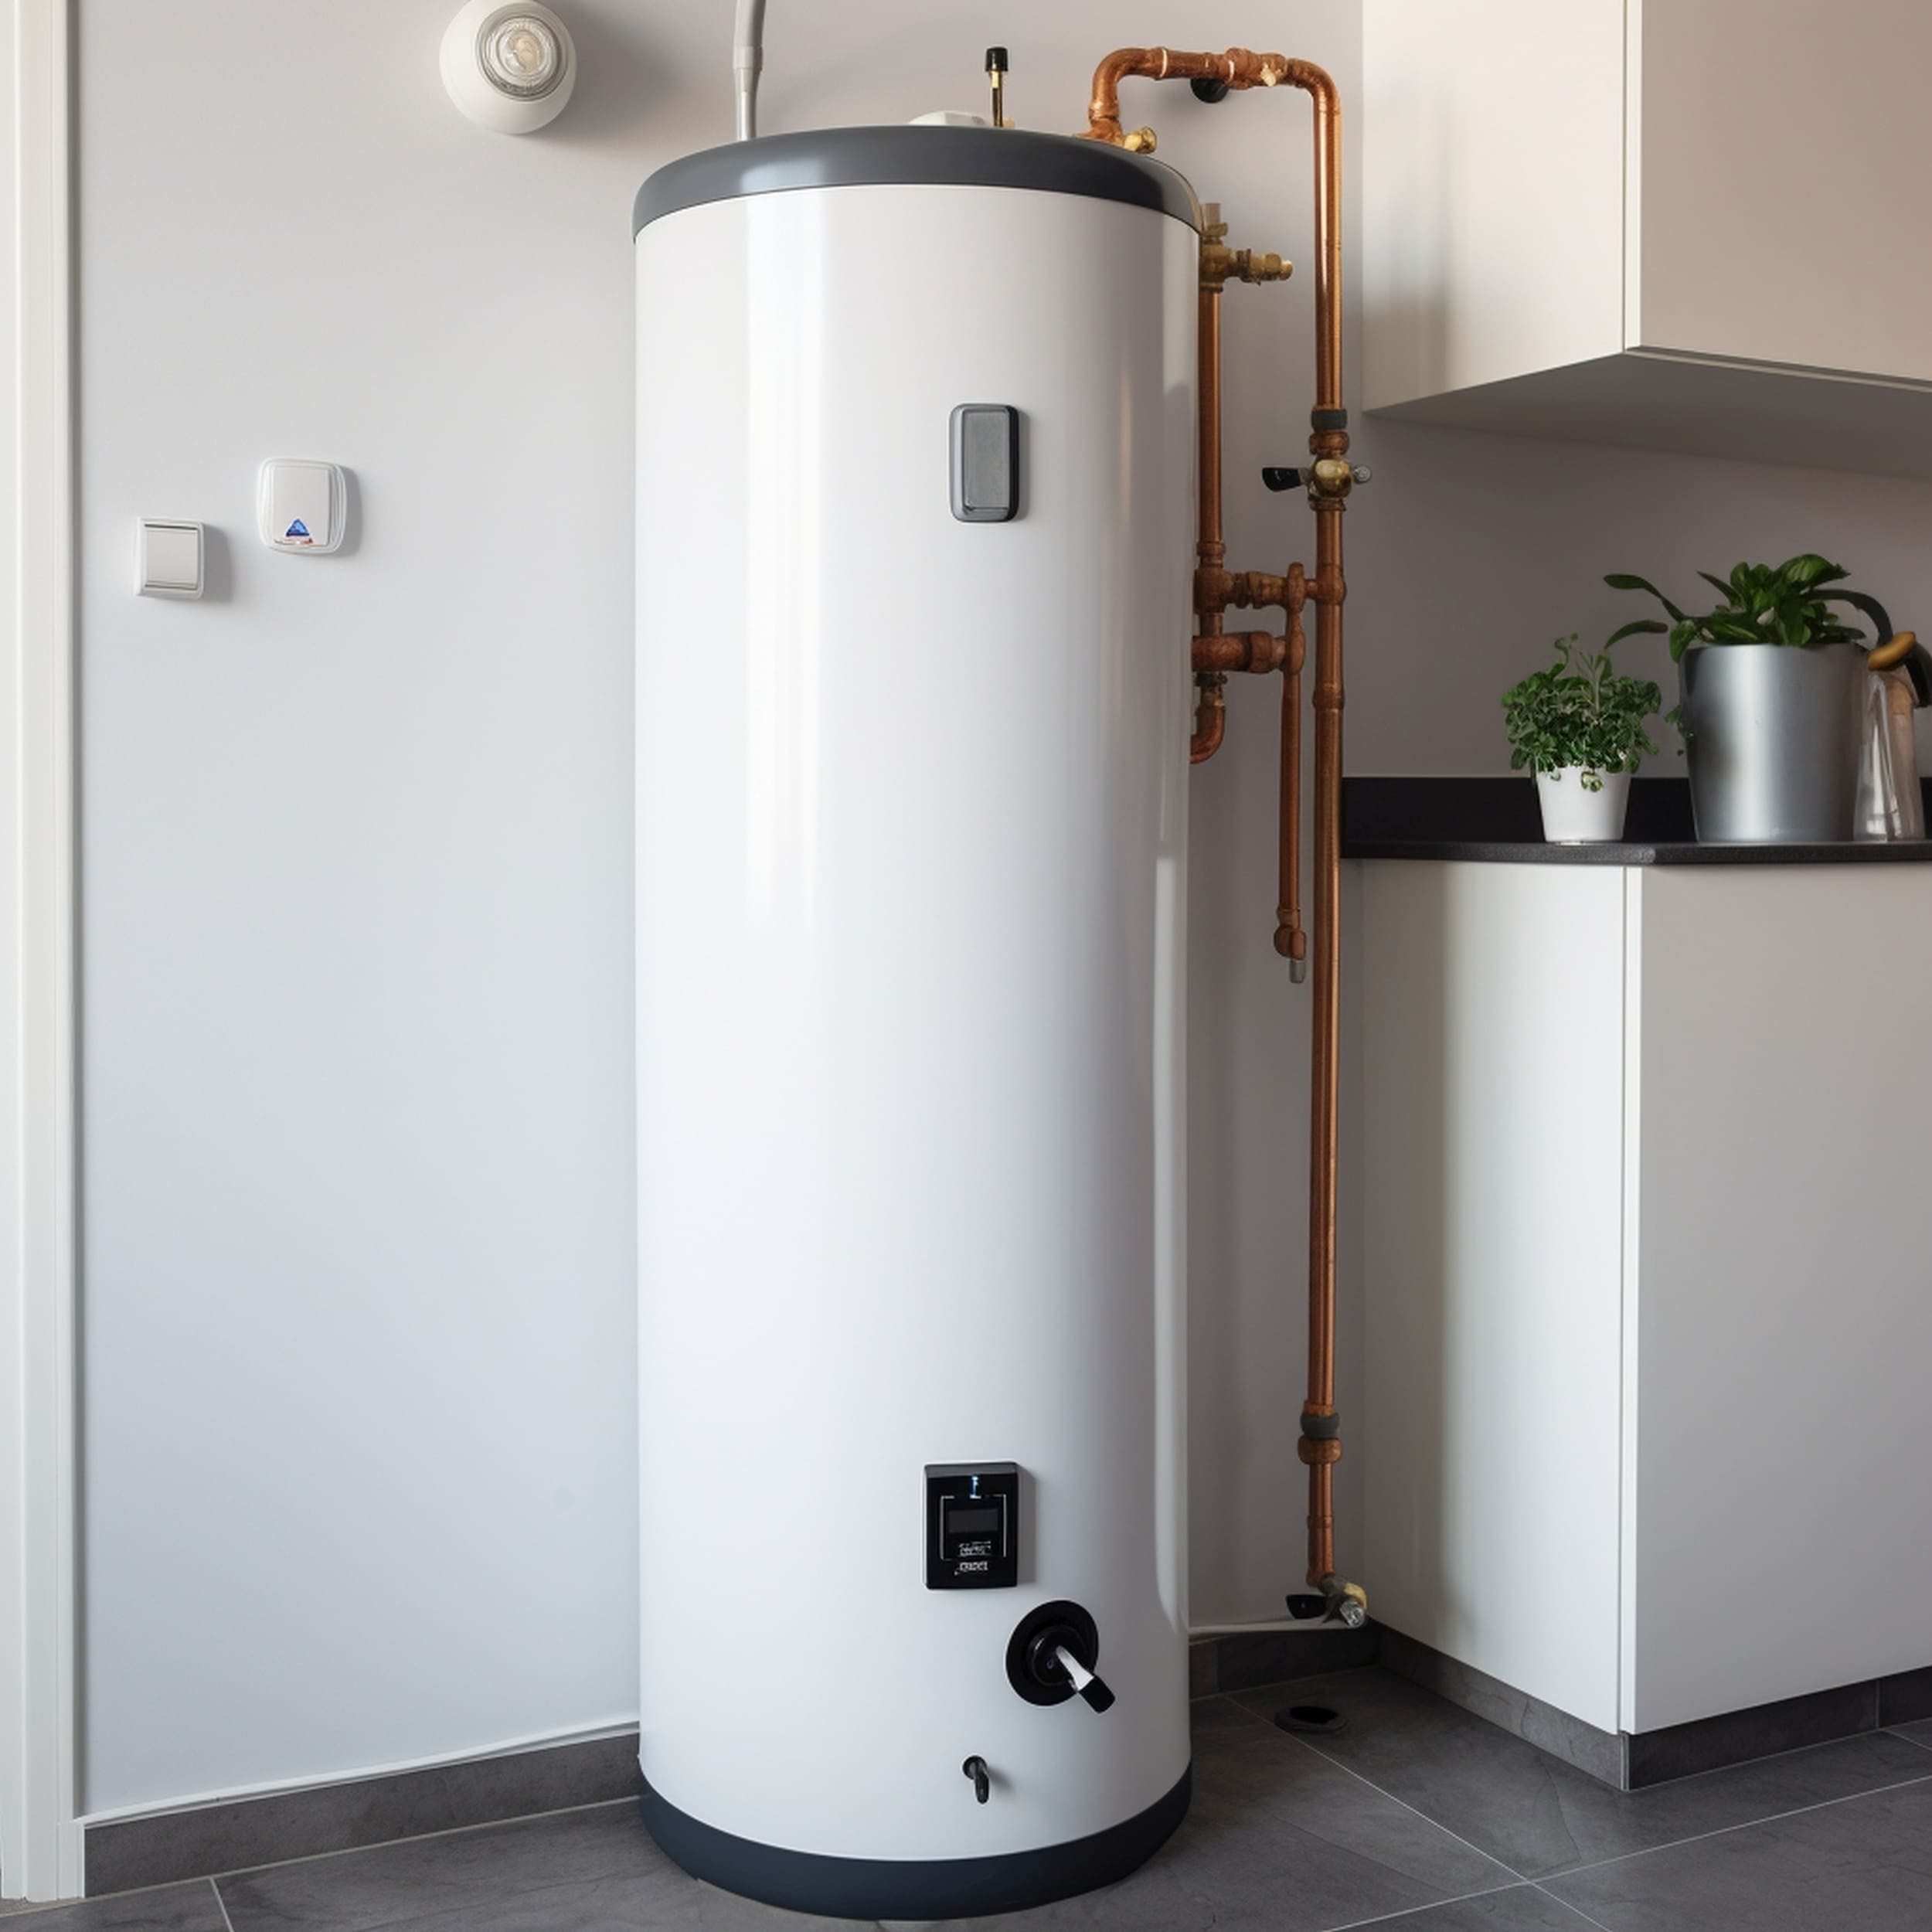 Water Heater Installed in  a Simple White Kitchen